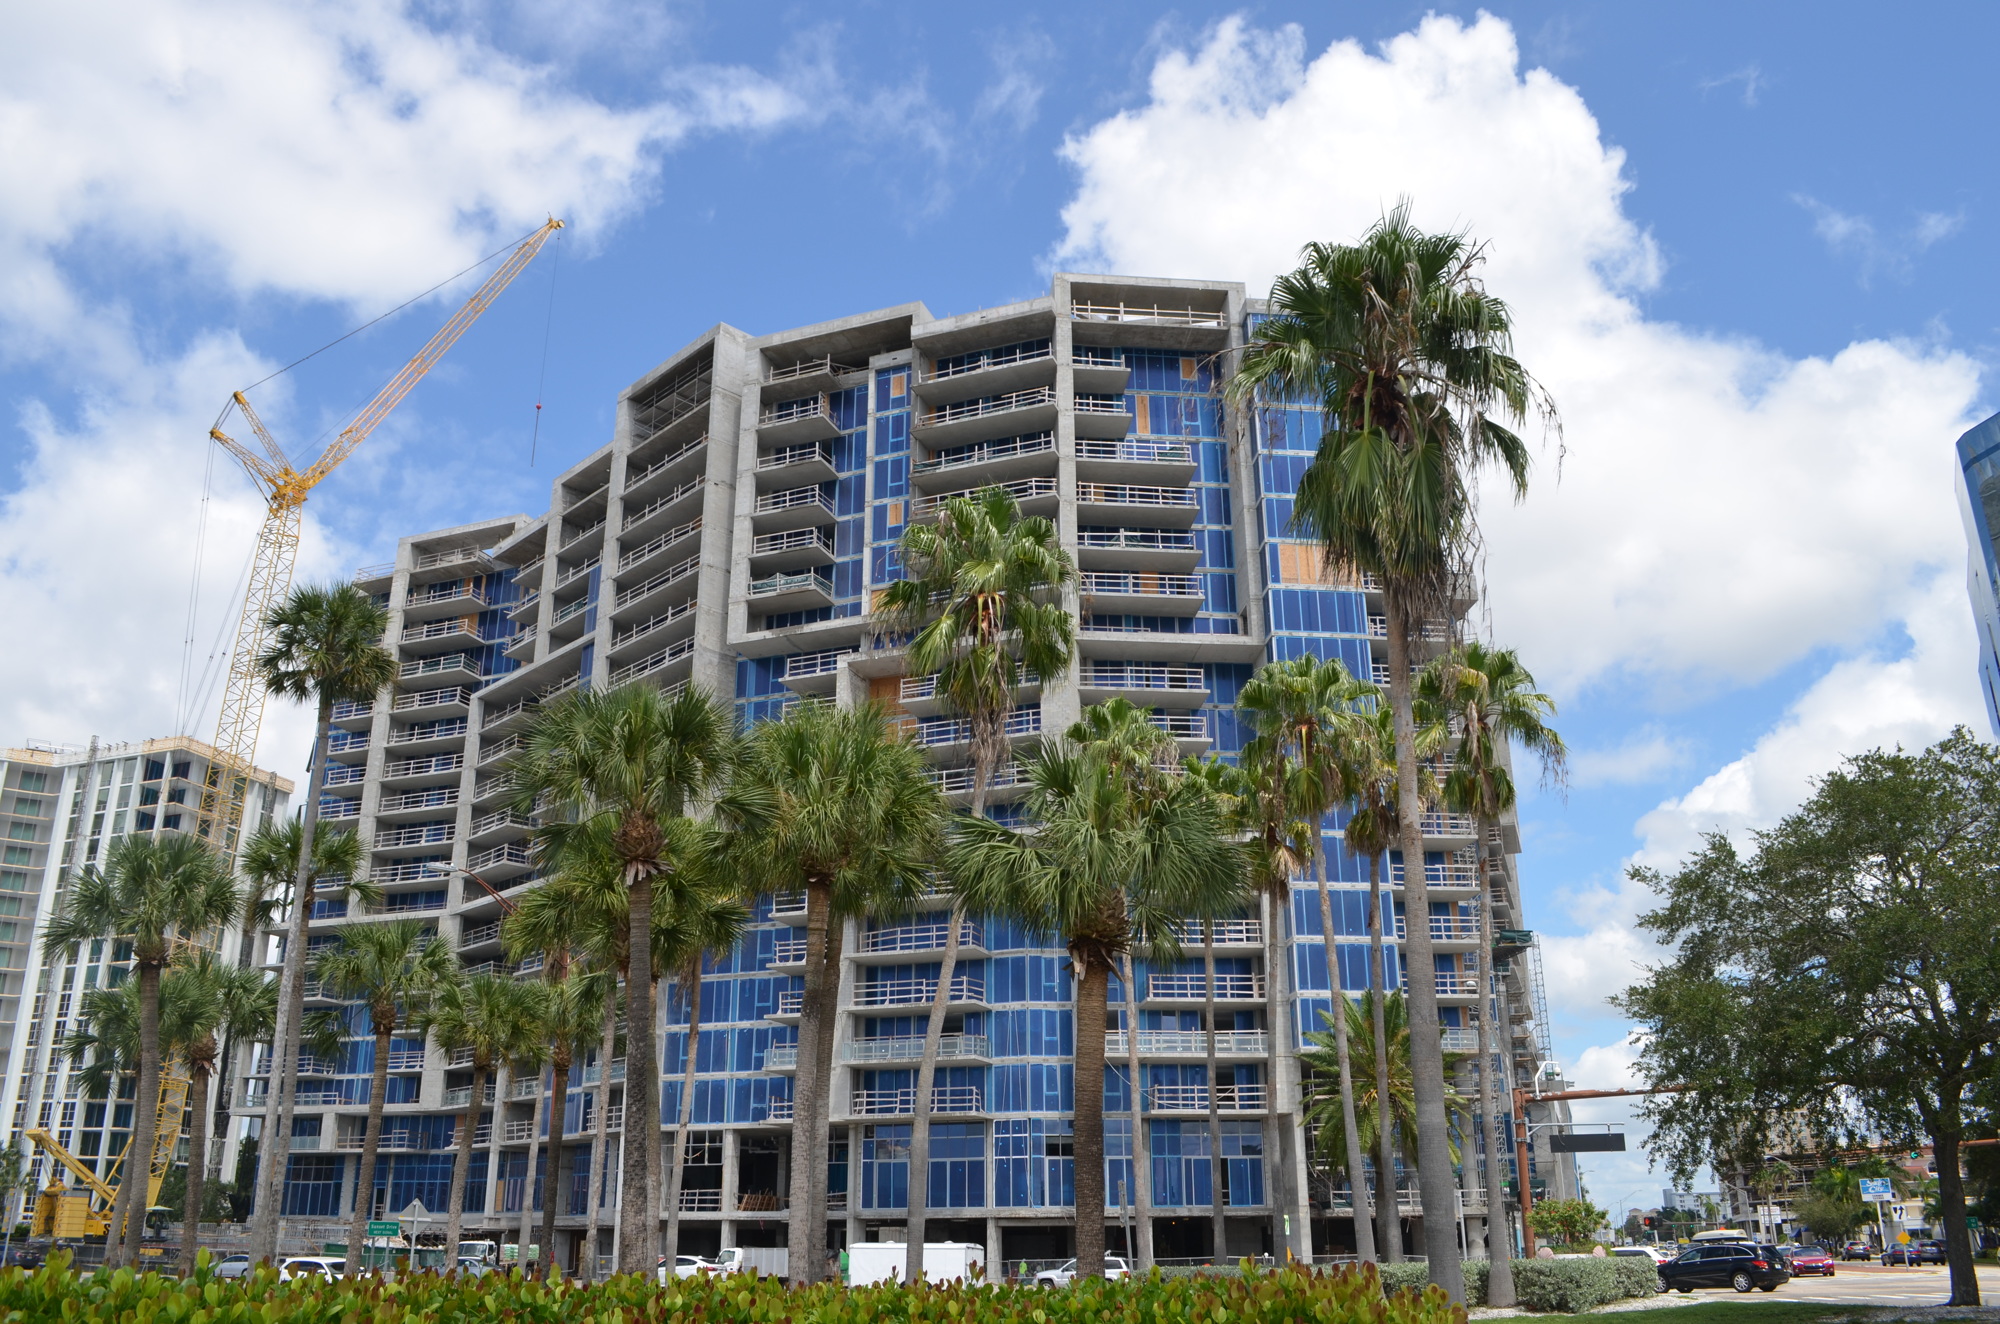 The Vue Sarasota Bay development has been the subject of harsh criticism from residents.